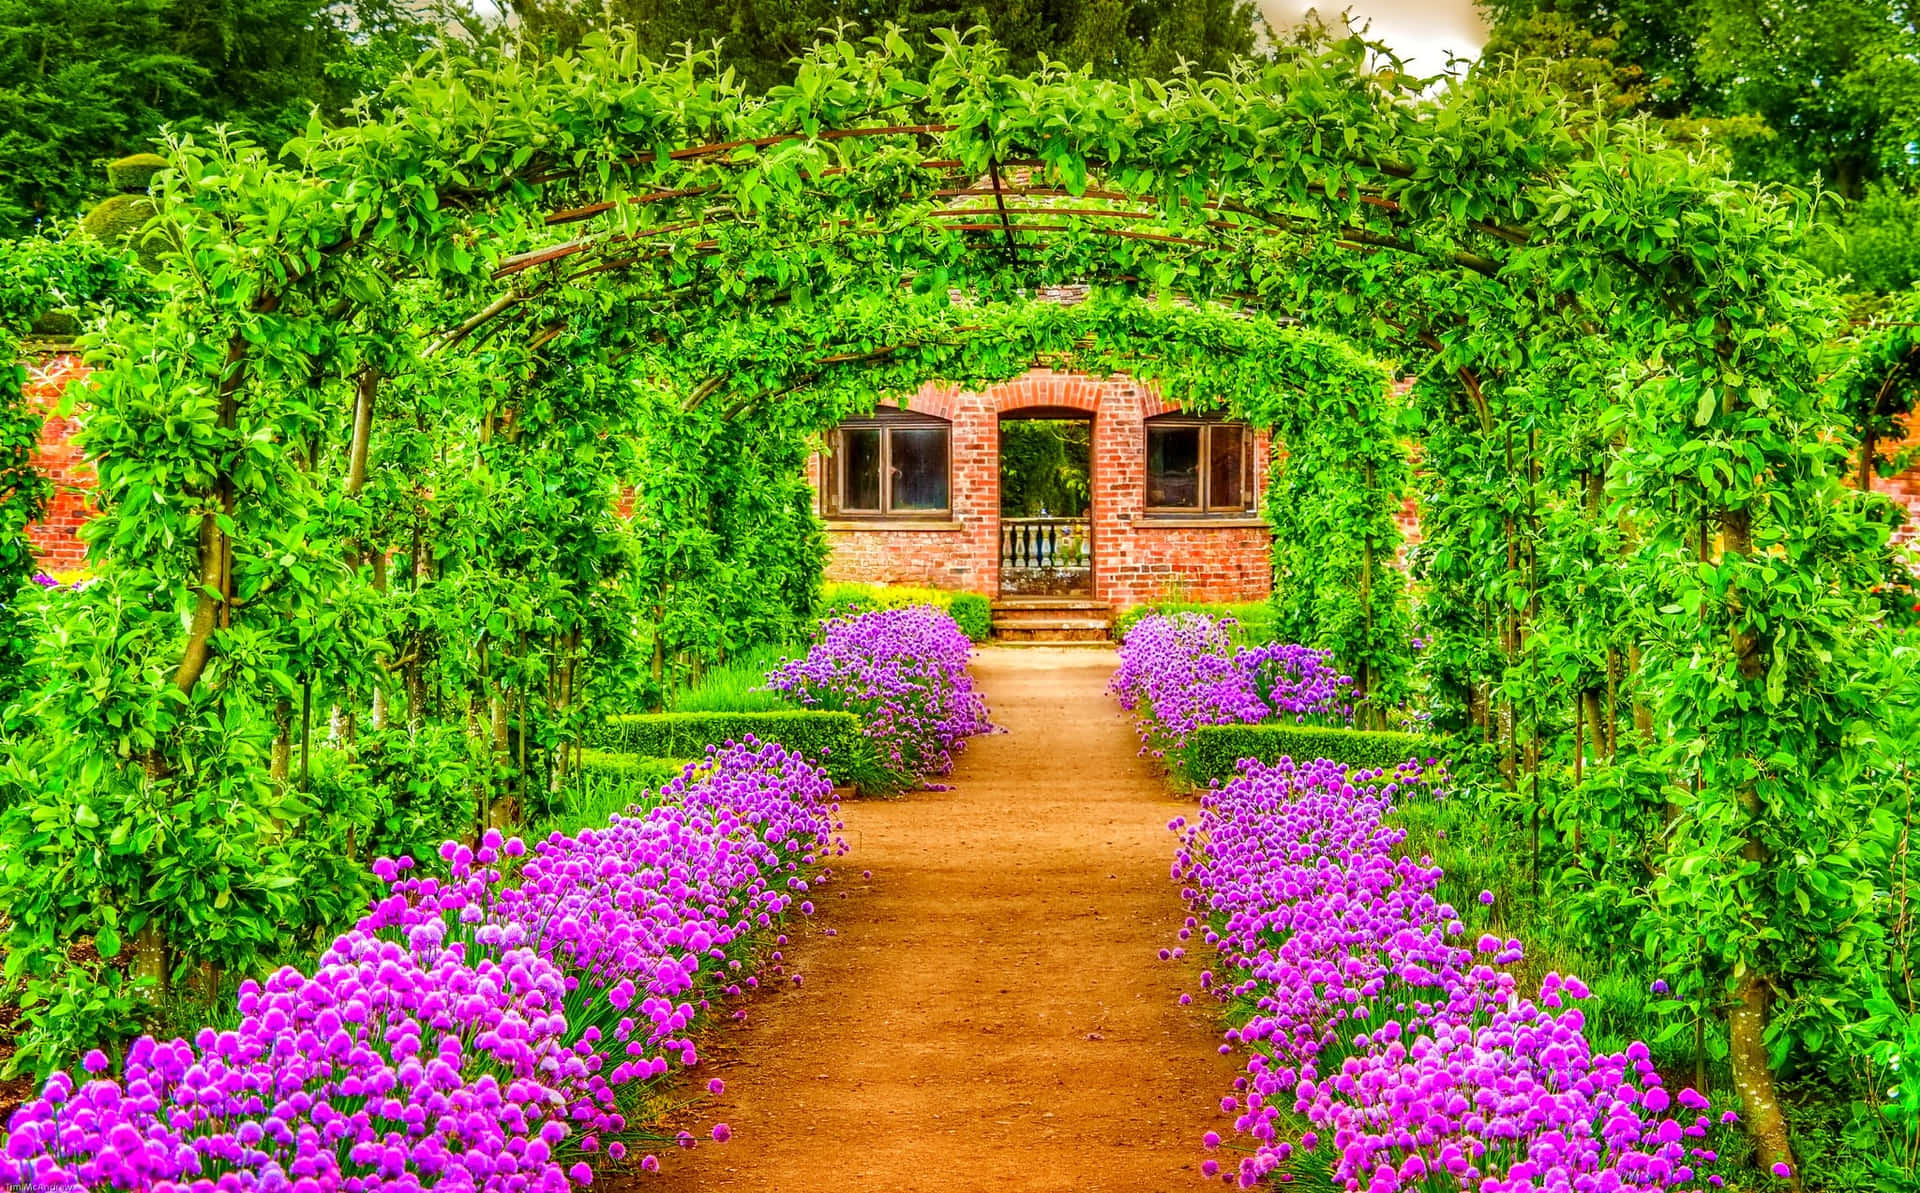 A Pathway With Purple Flowers